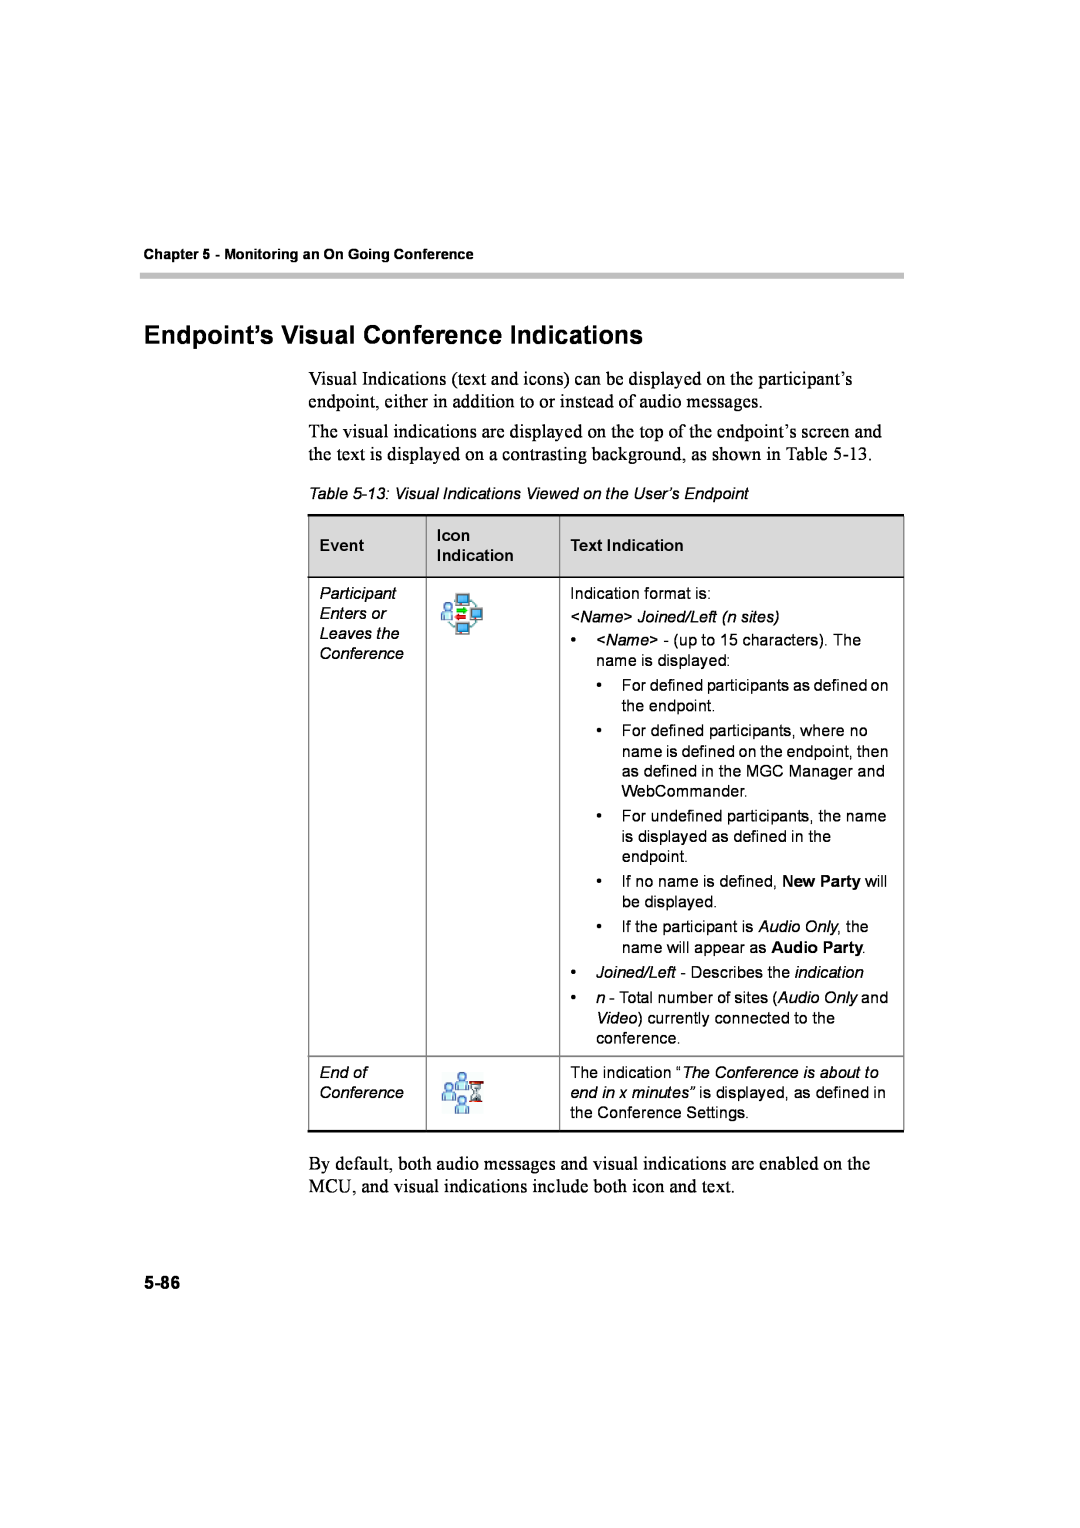 Polycom 8 manual Endpoint’s Visual Conference Indications, Event, Icon, Text Indication 